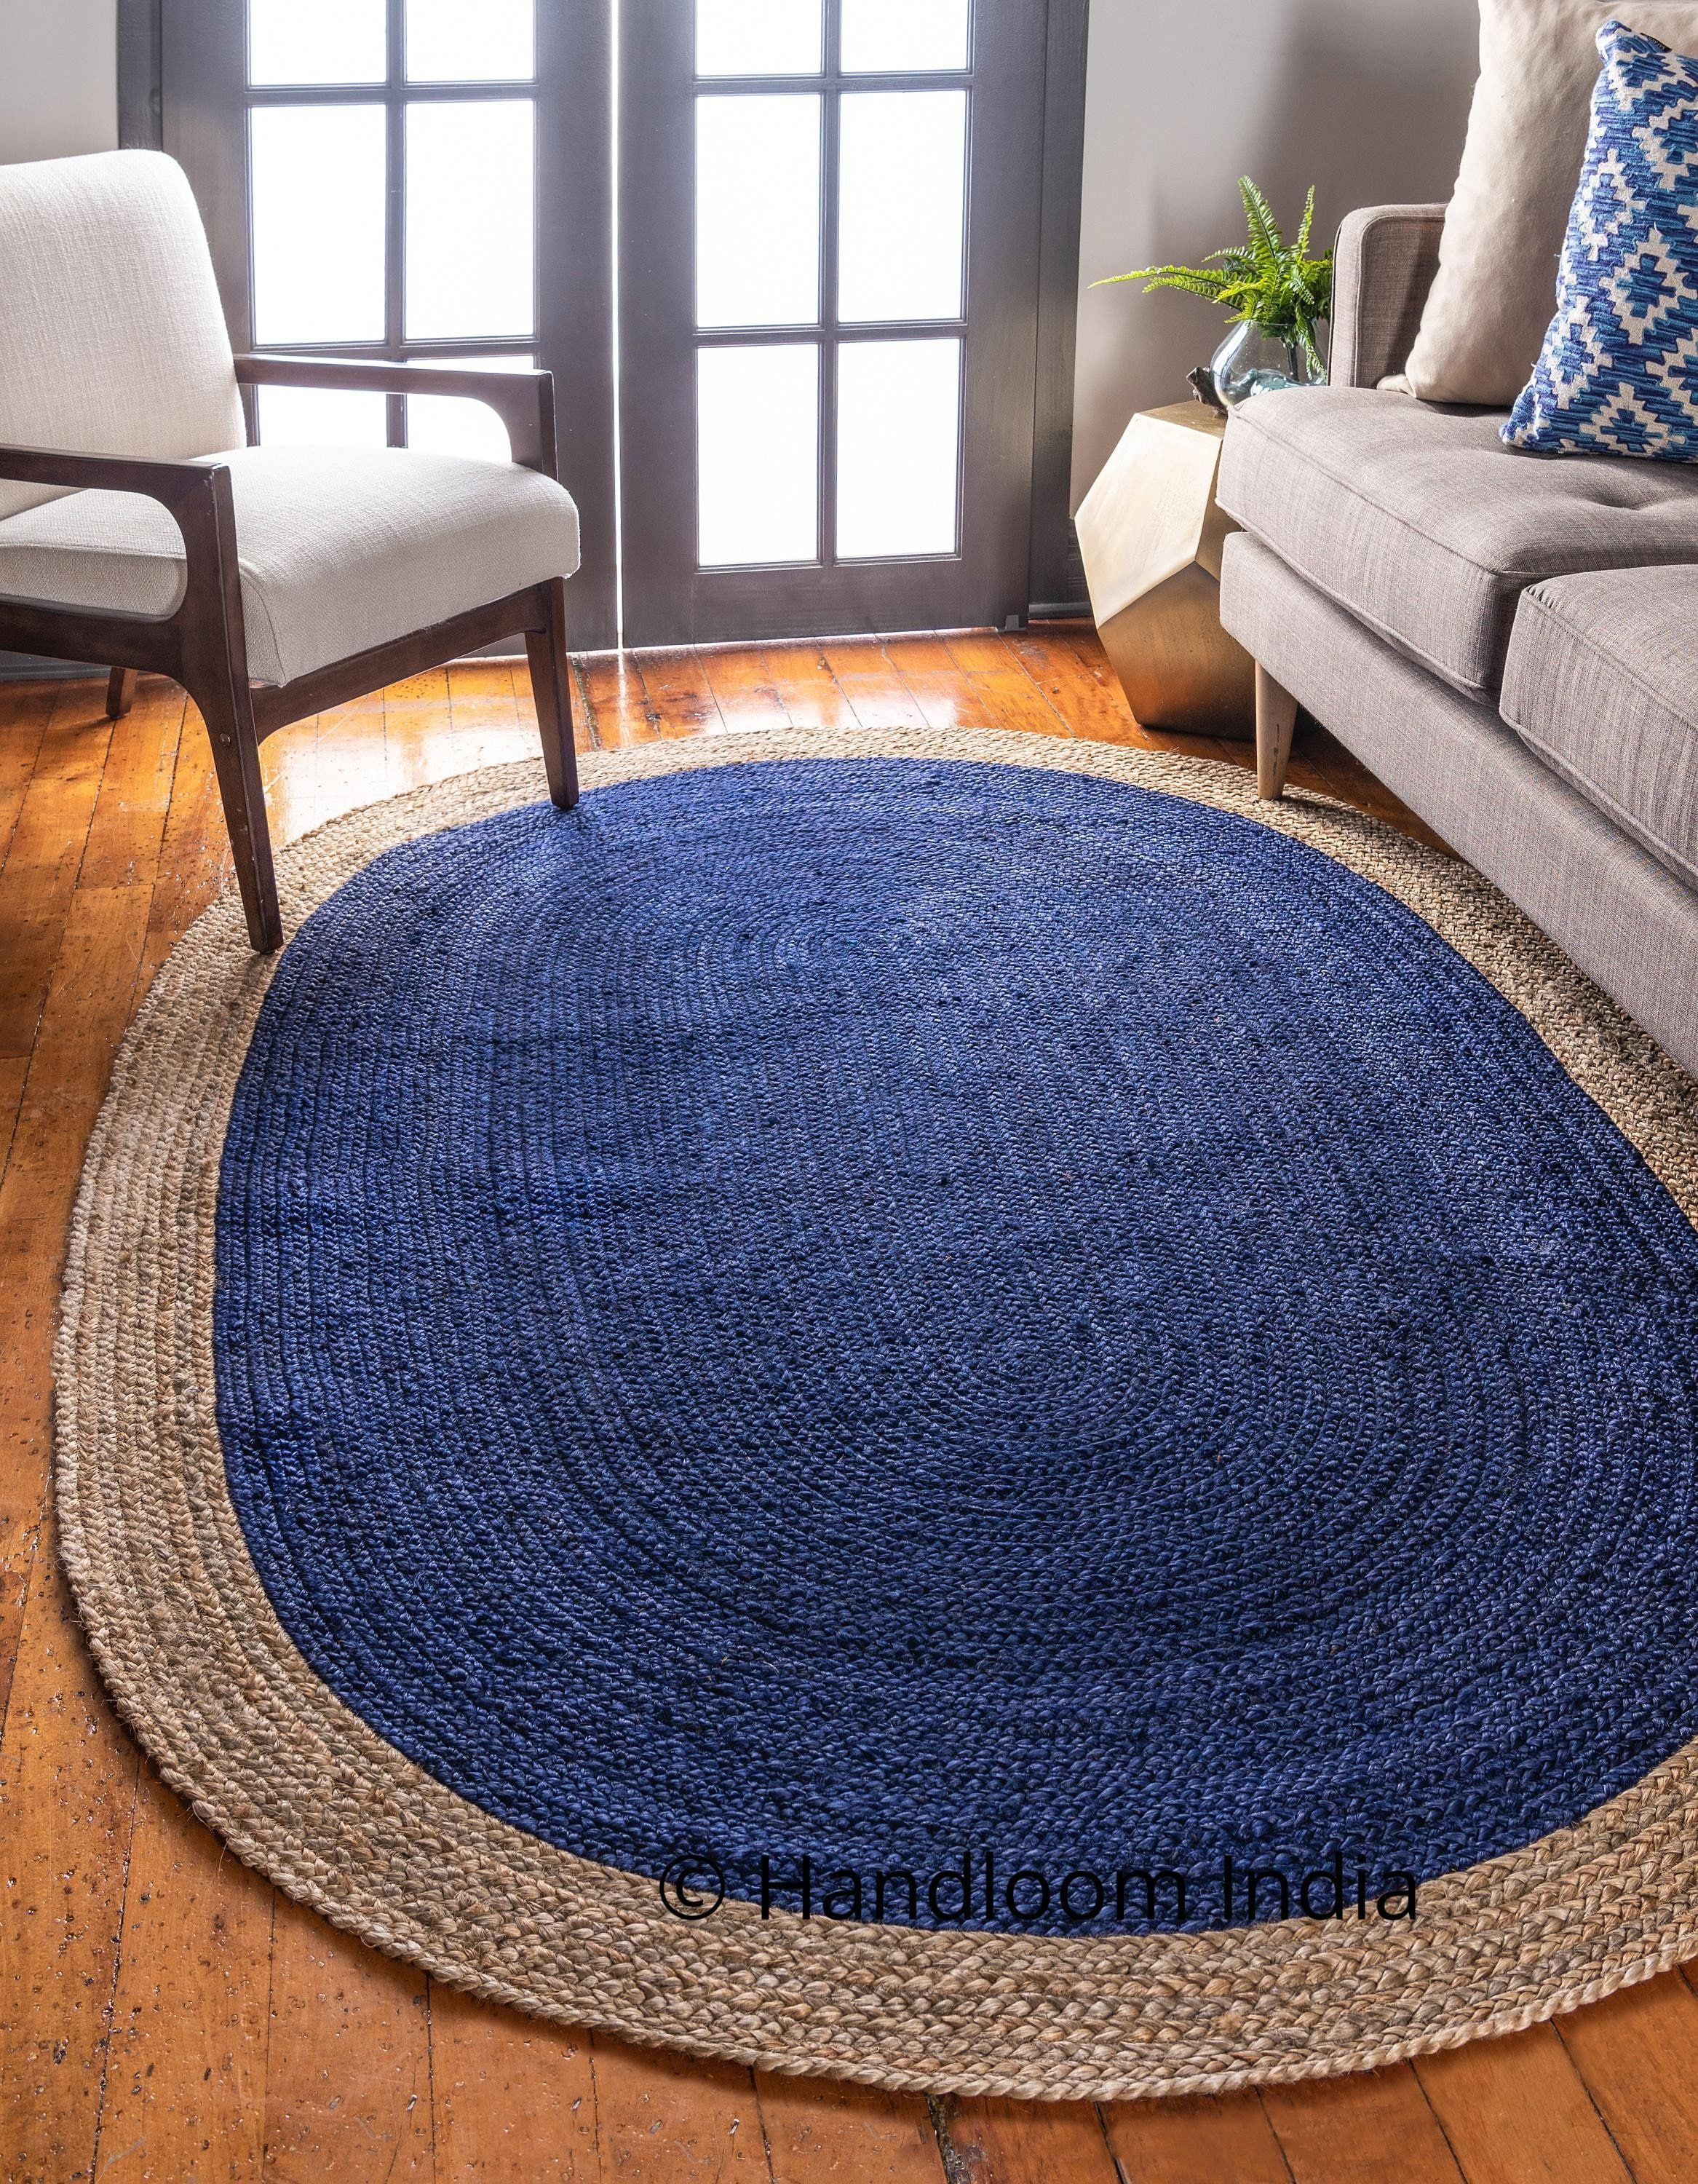 Featured Photo of 15 Best Ideas Blue Oval Rugs